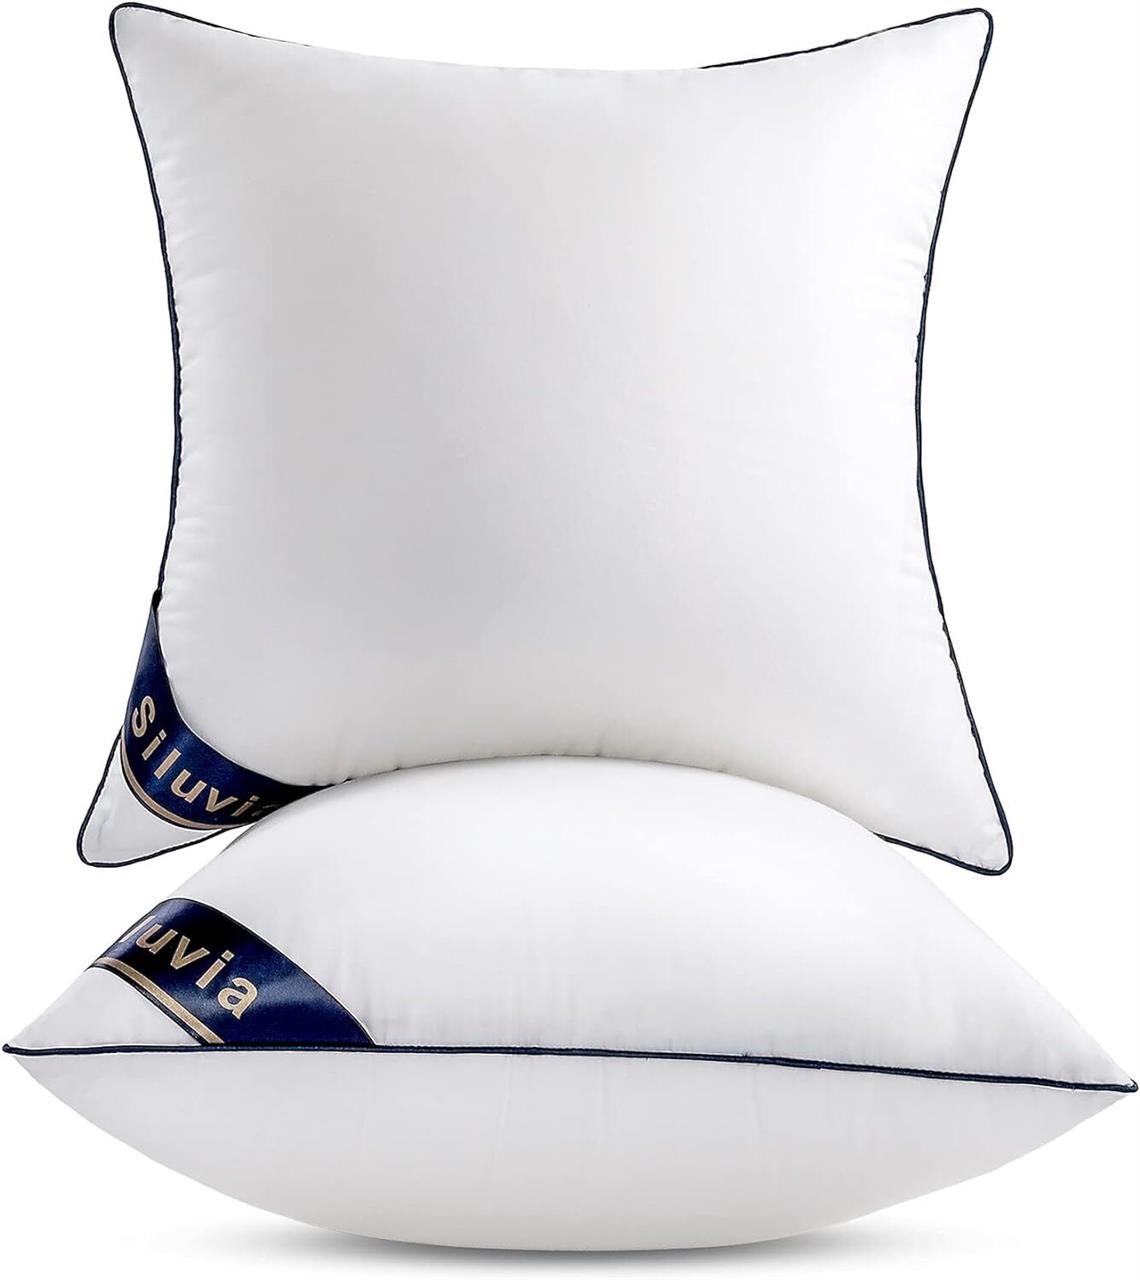 Siluvia 18x18 Pillow Inserts Set of 2 - 2Pack